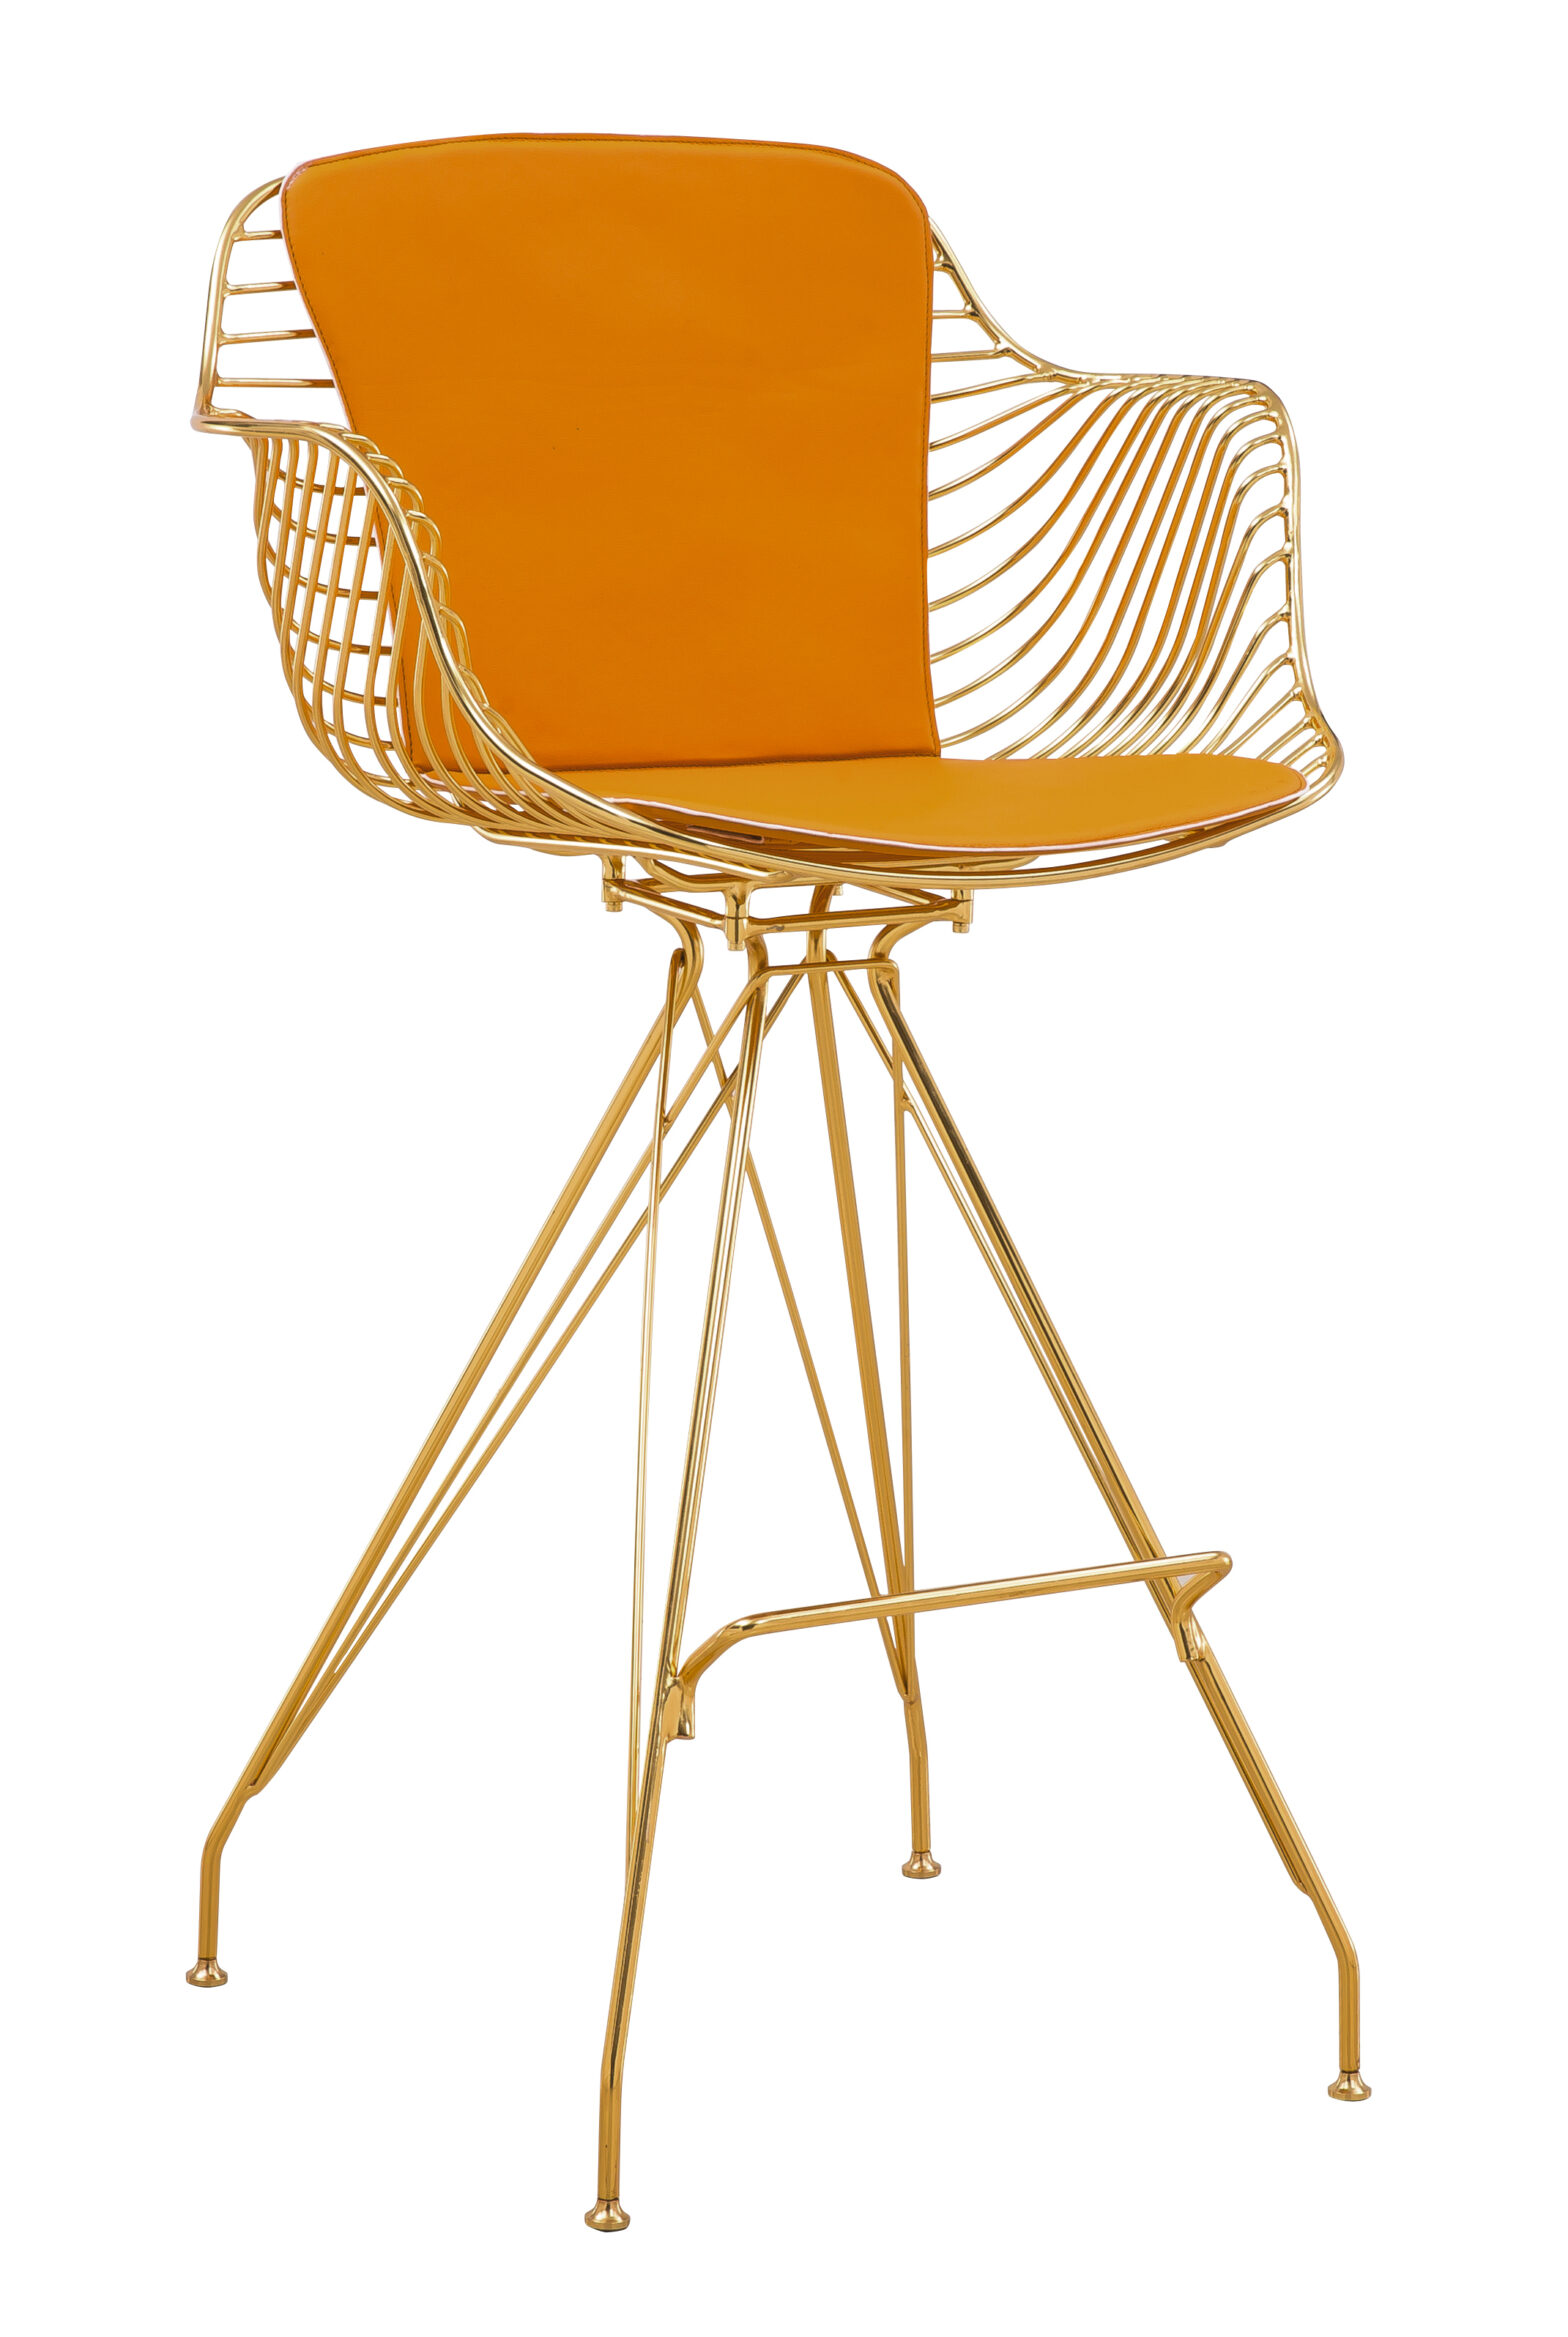 Gold electroplated metal arrow wire barstool chair with armrest